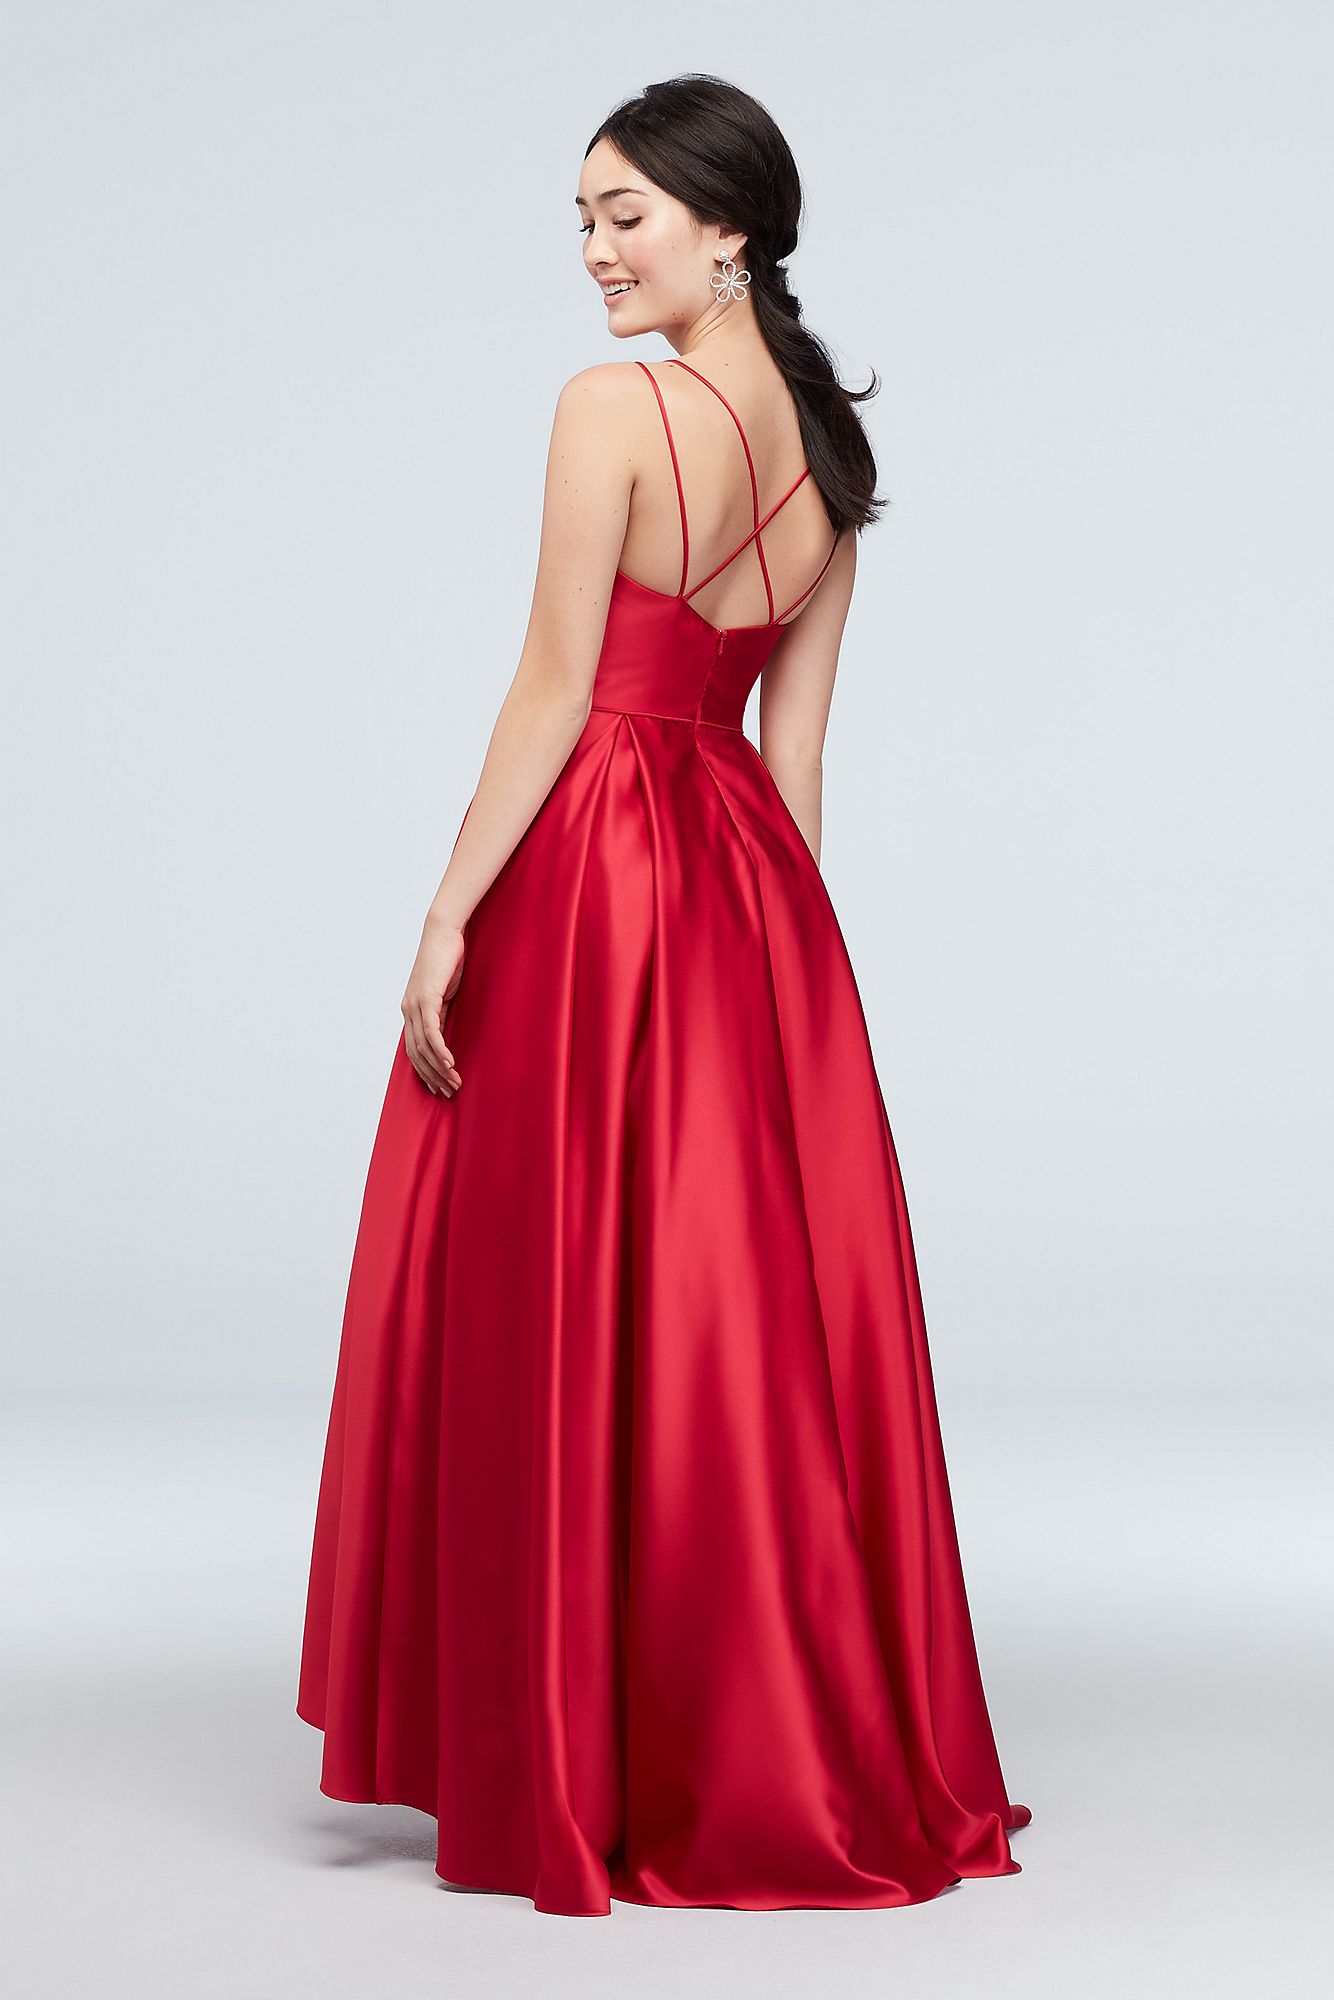 Double Skinny Strap Satin Ball Gown with Pockets 1620BN